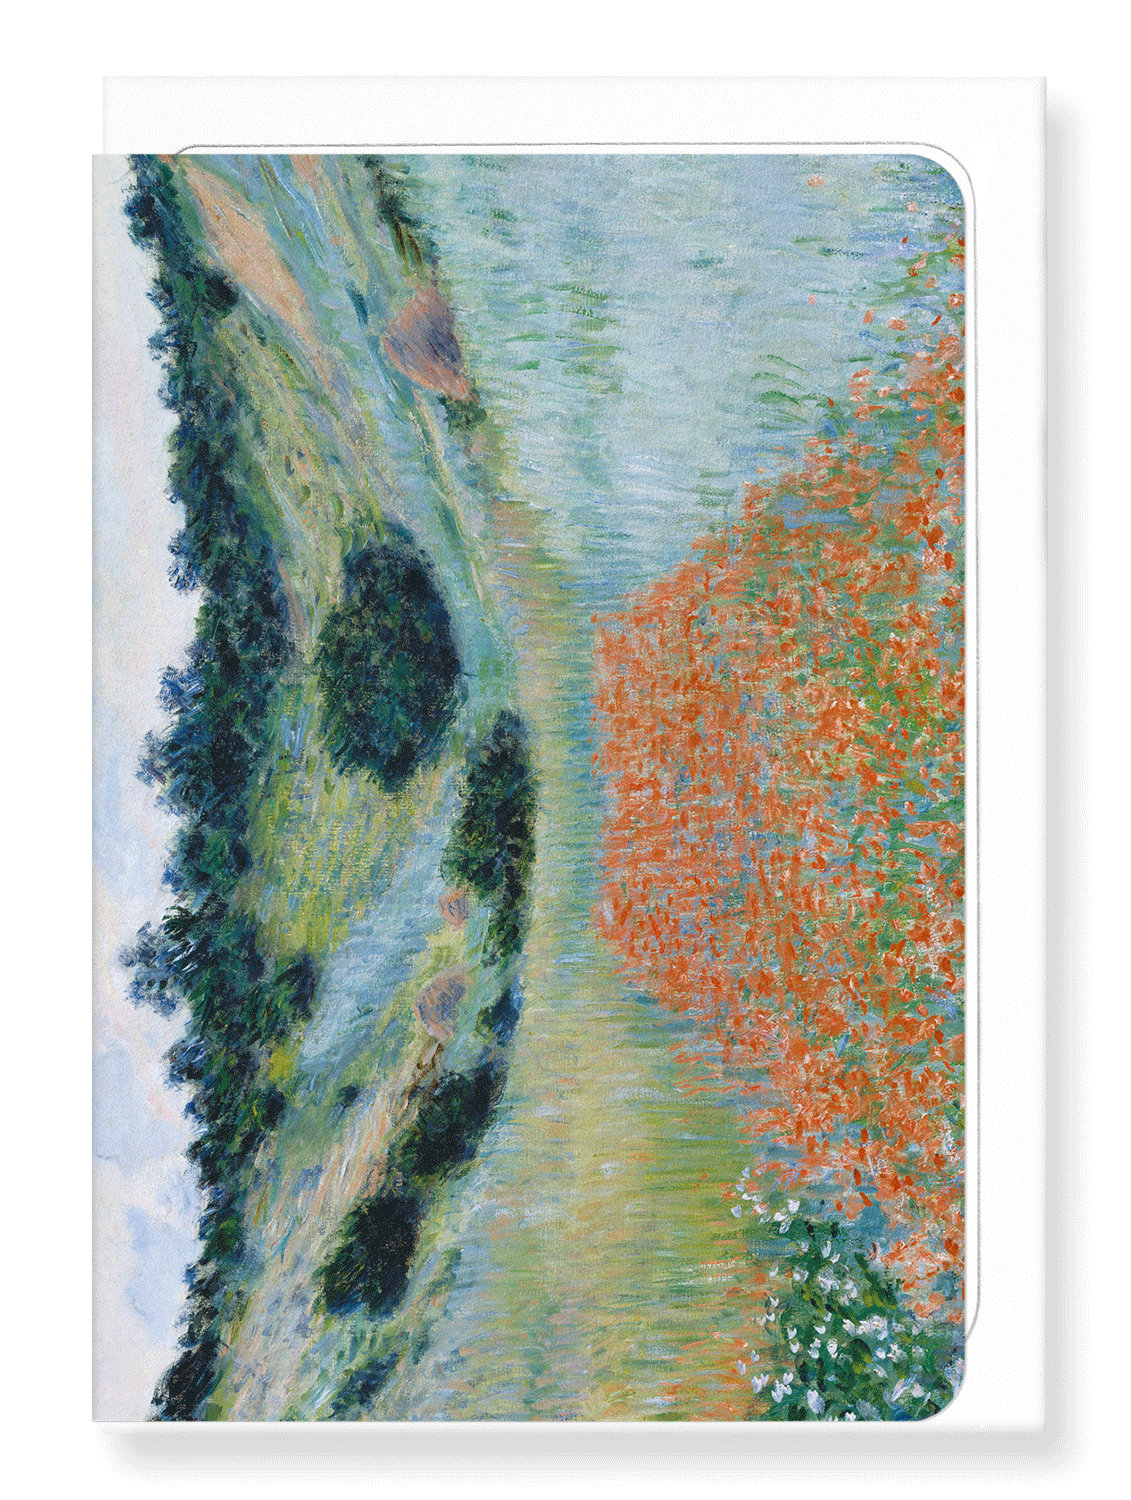 Ezen Designs - Poppy field in a hallow by monet - Greeting Card - Front